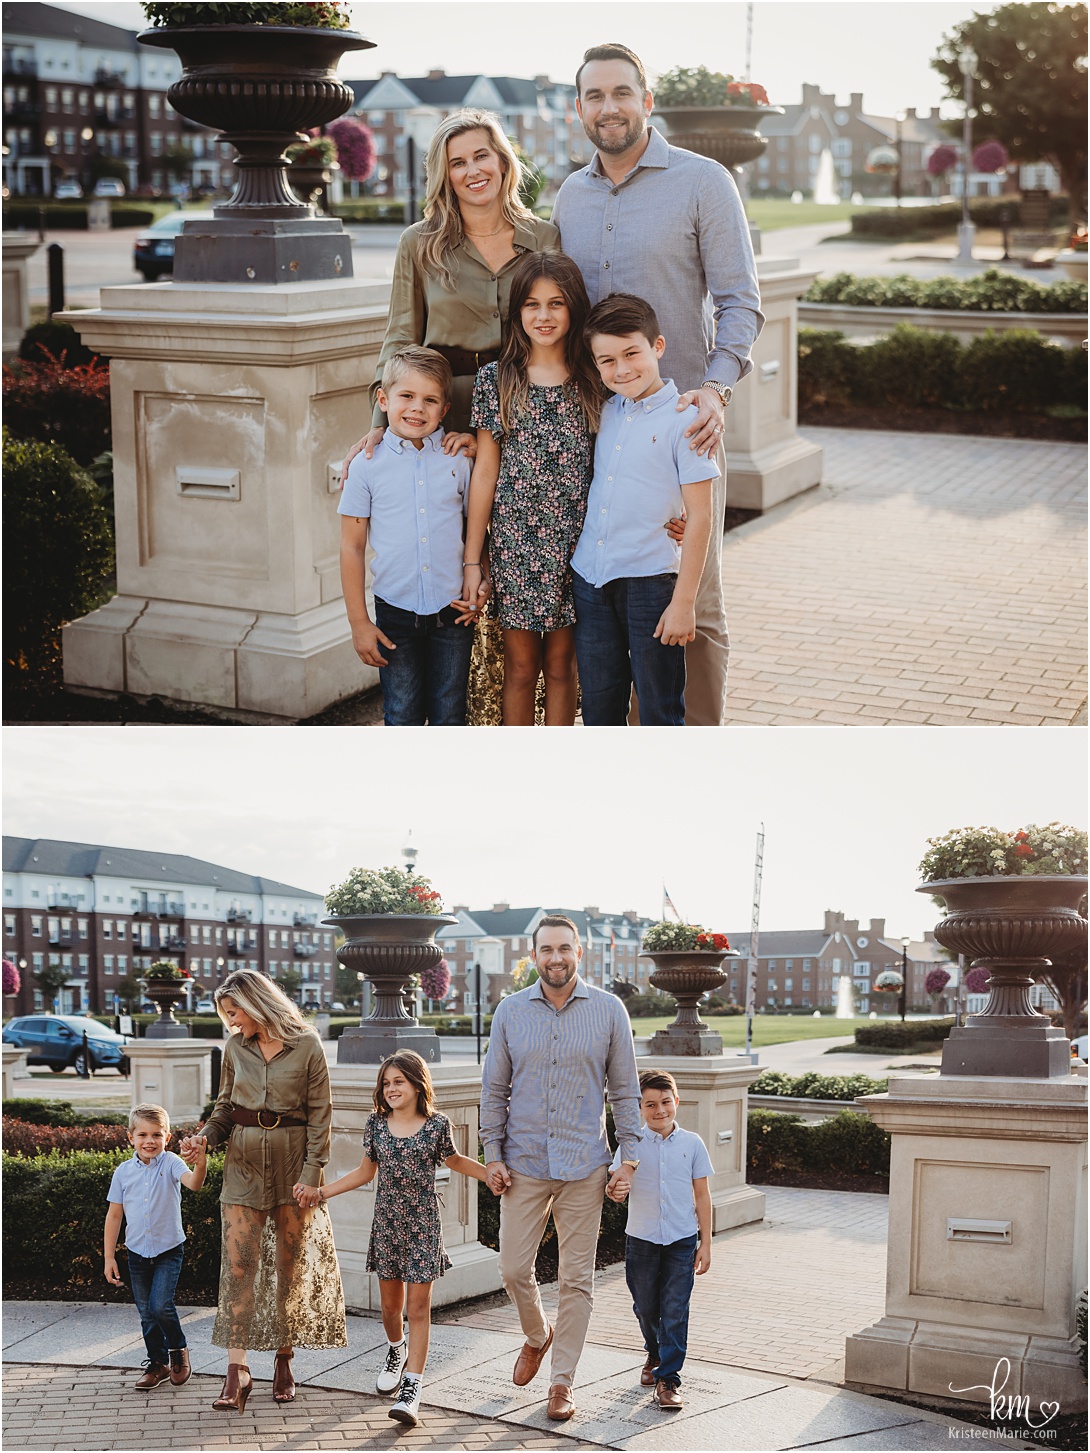 Urban location for family photography in Indianapolis 